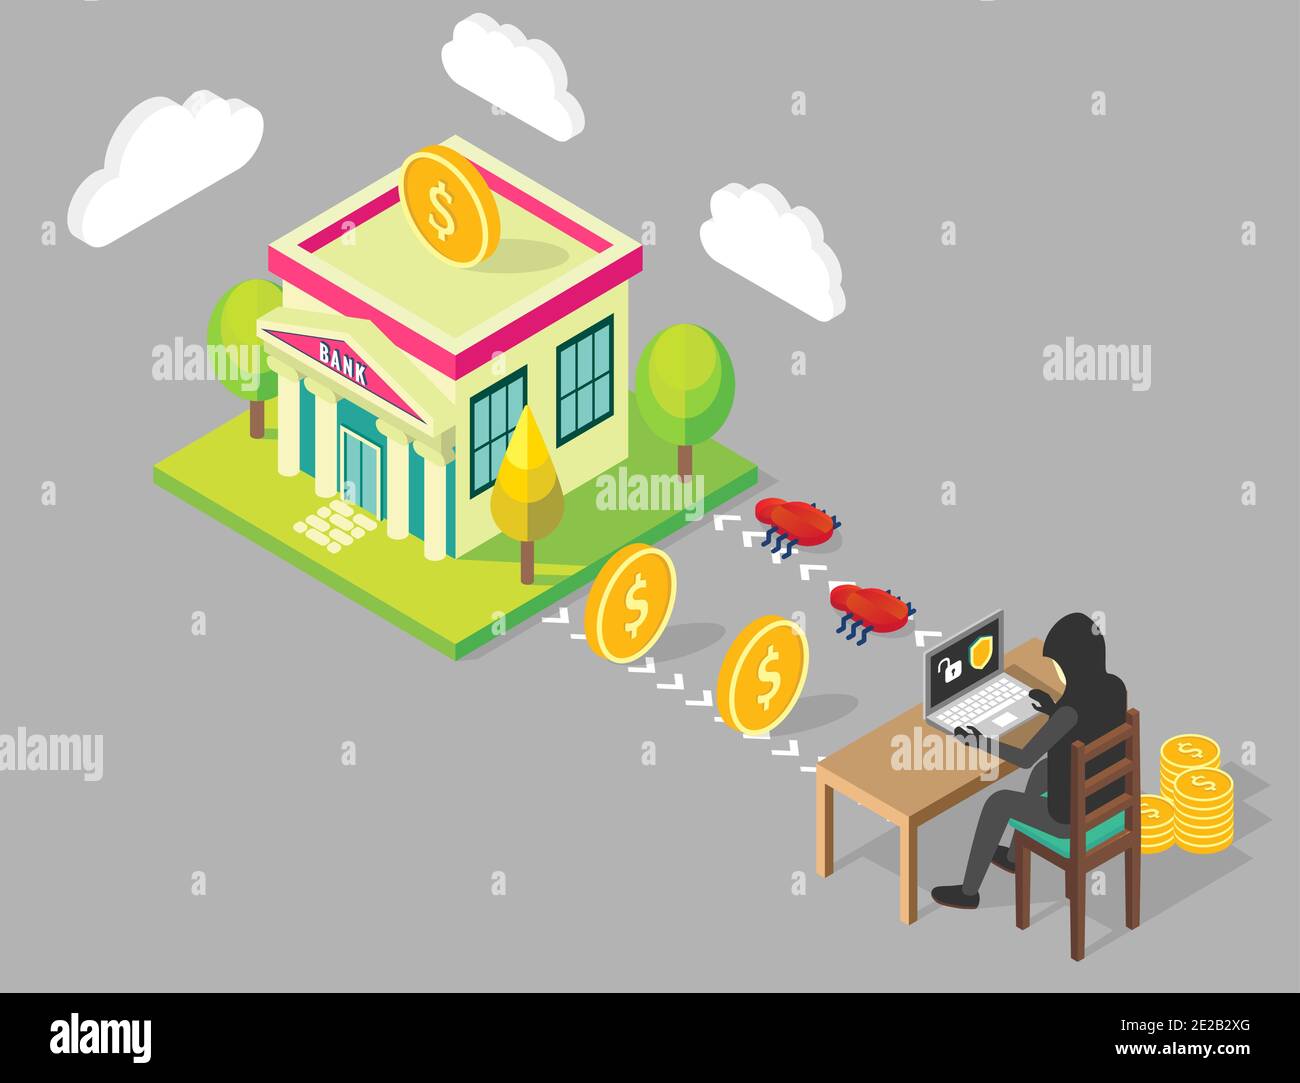 Bank hacking concept vector isometric illustration Stock Vector